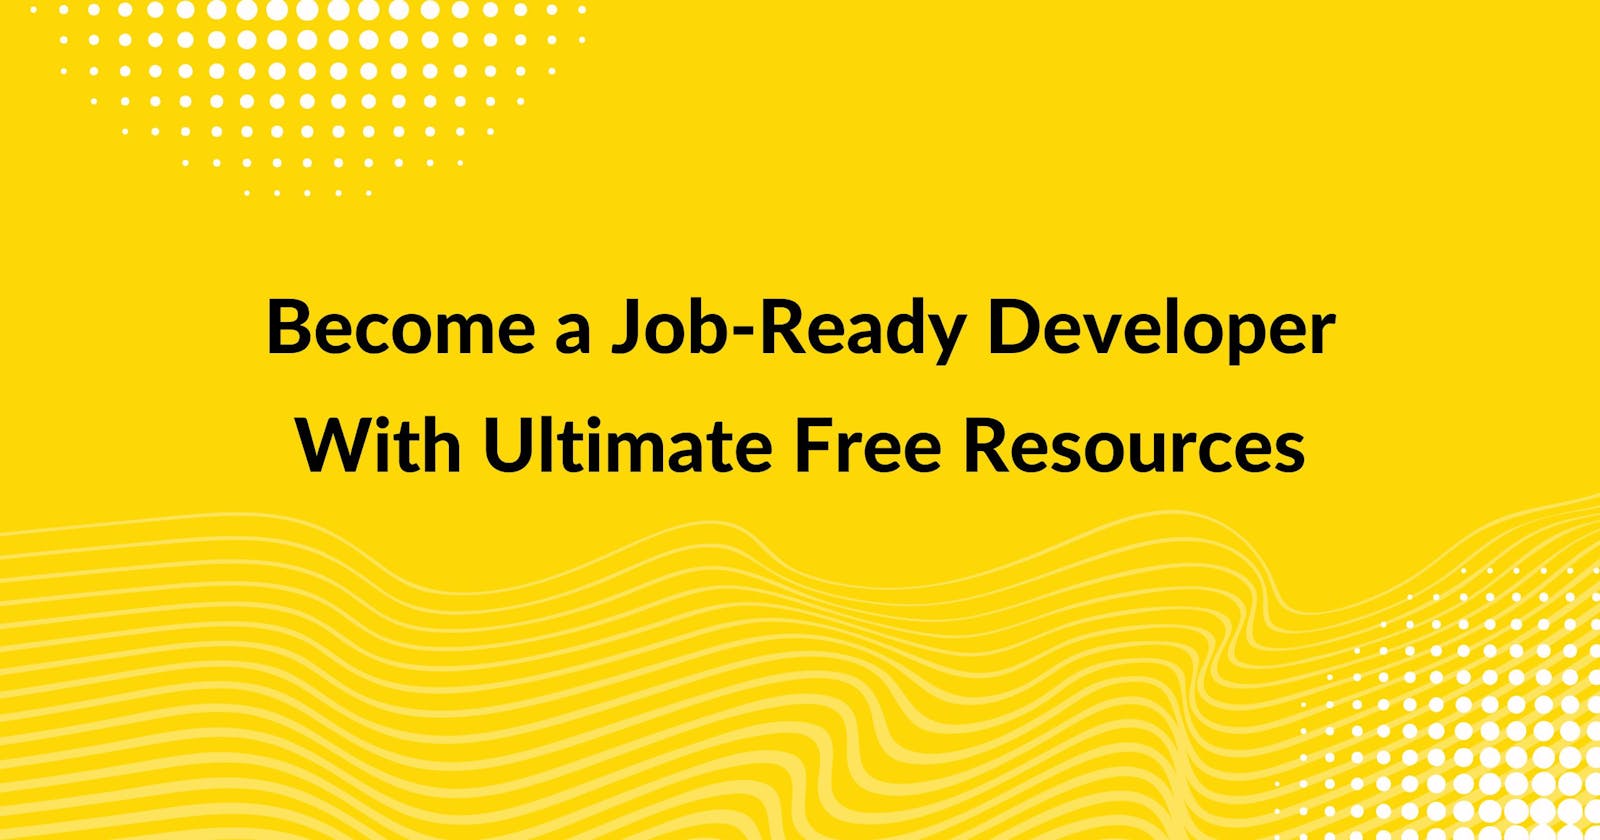 Become a Job-Ready Web Developer with these ultimate free resources